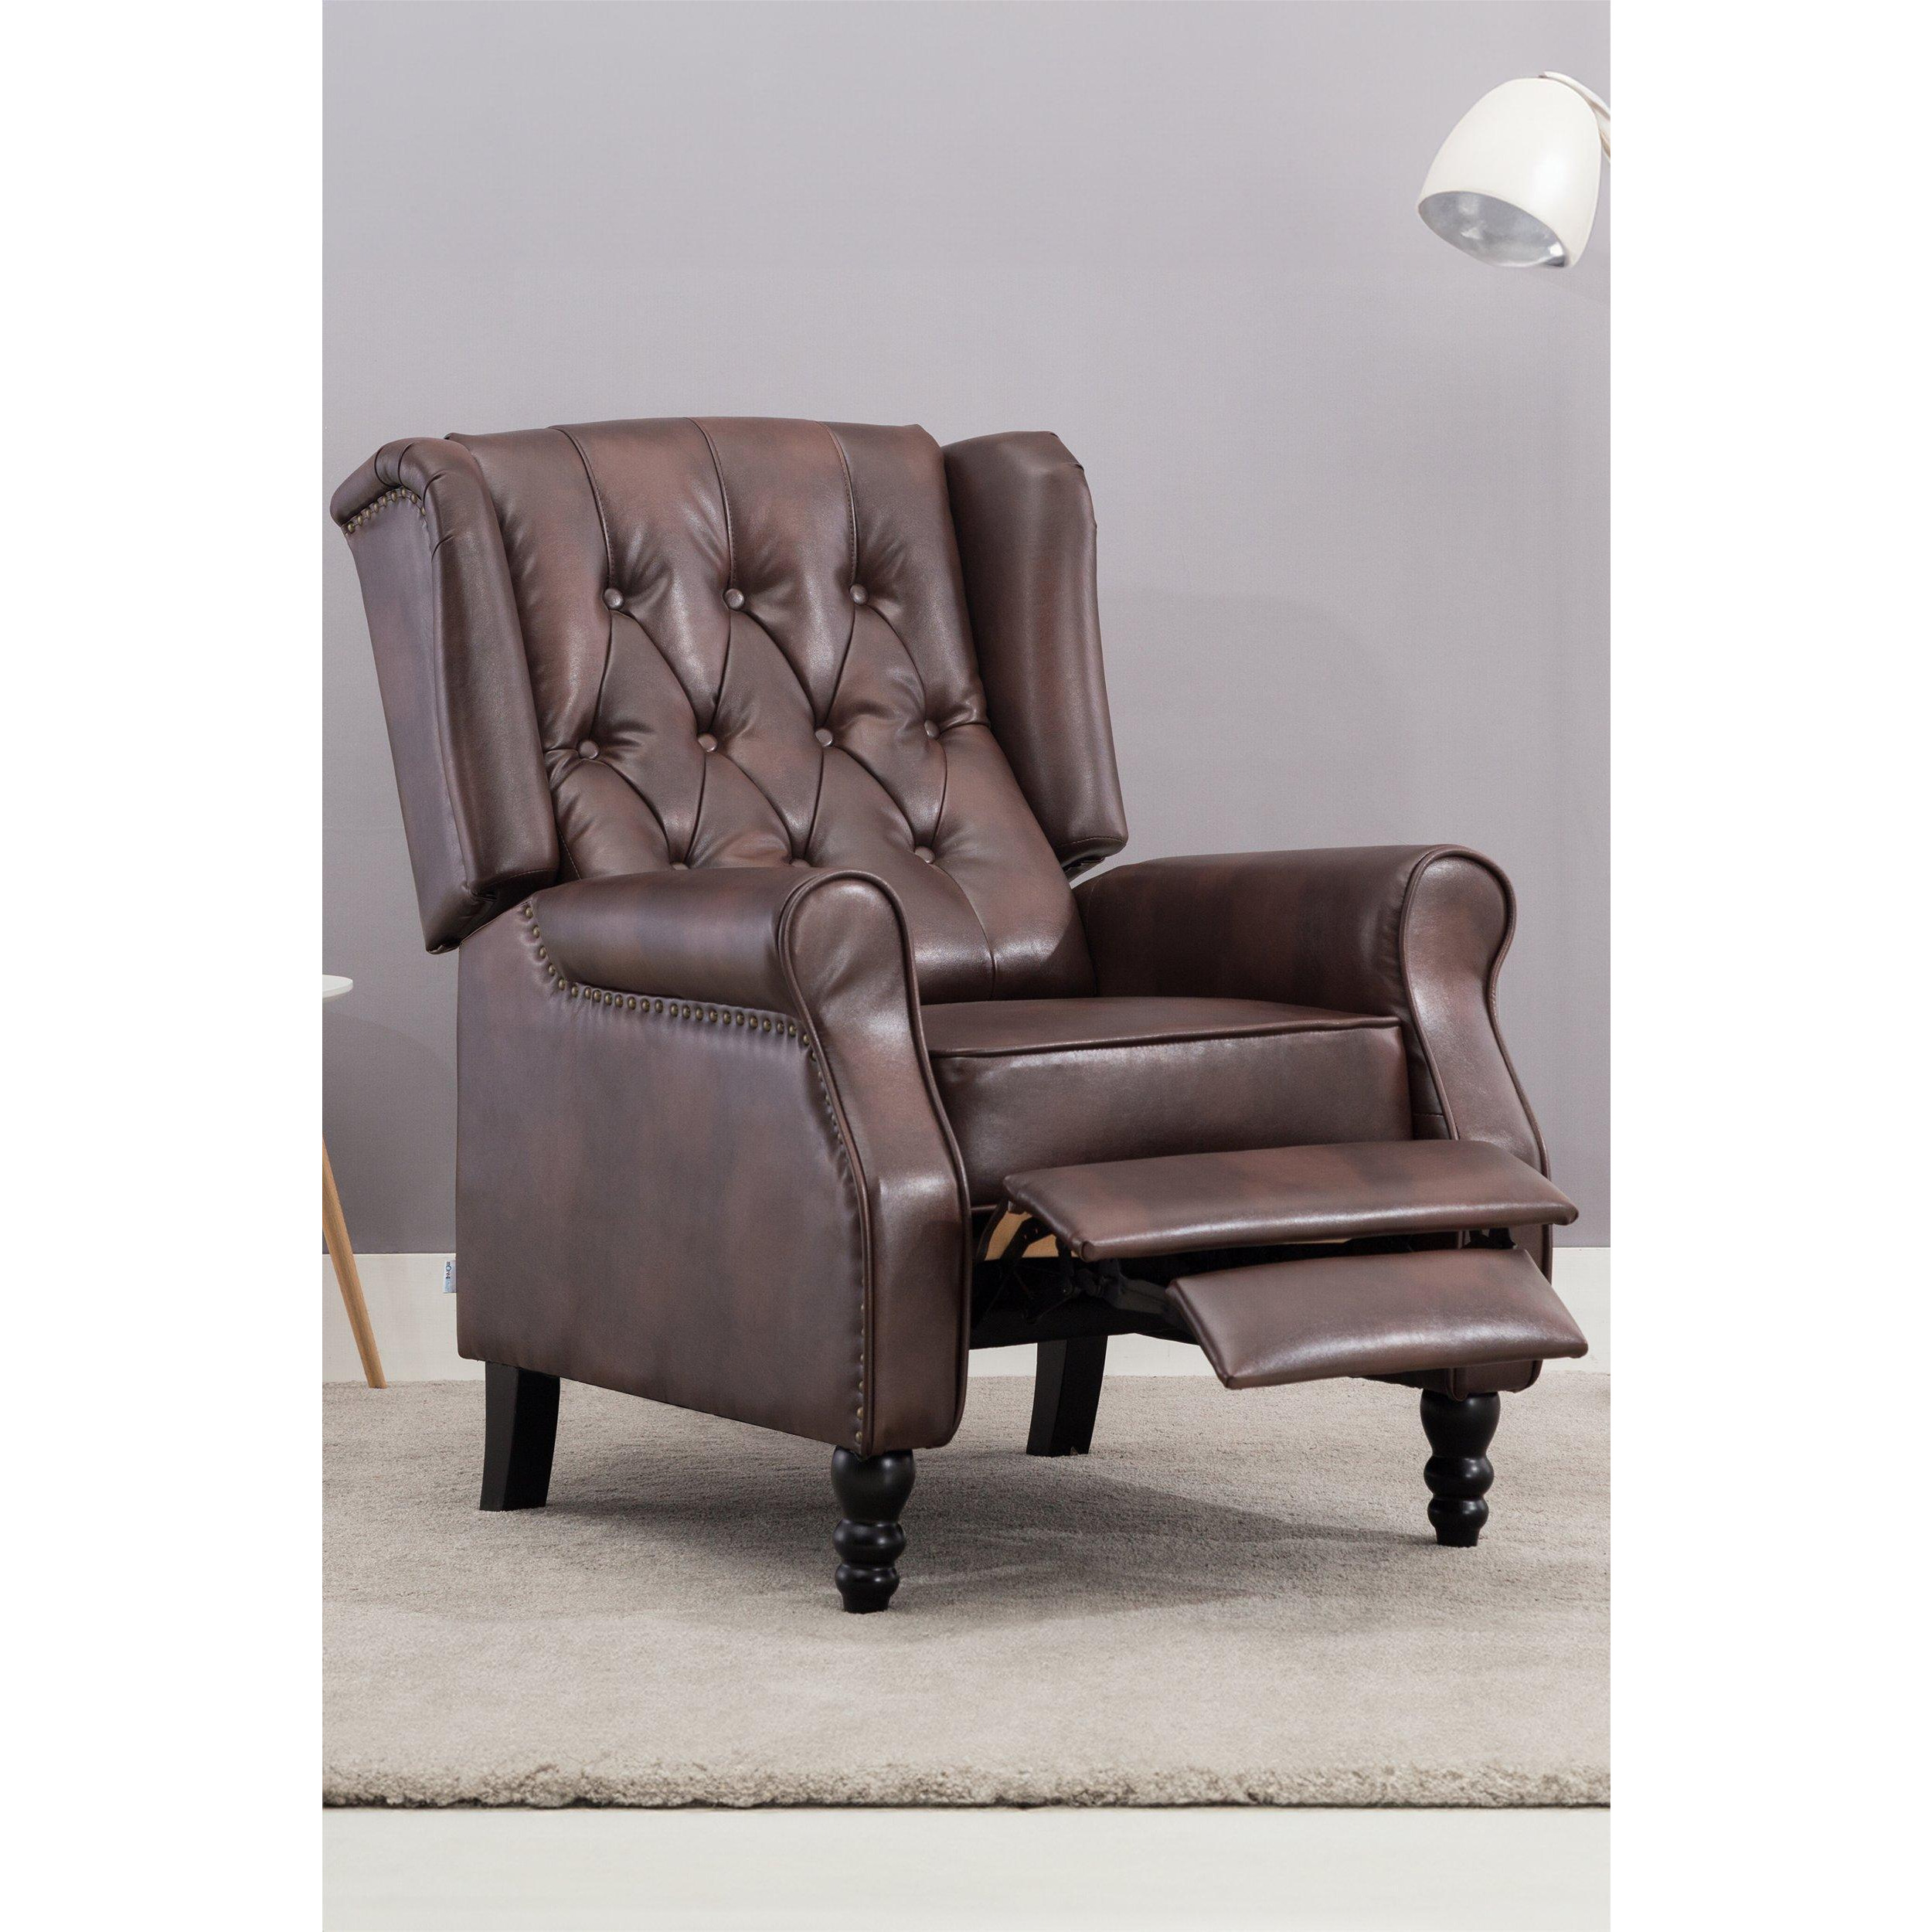 Althorpe Wing Back Recliner Button Back Fireside Leather Chair - image 1